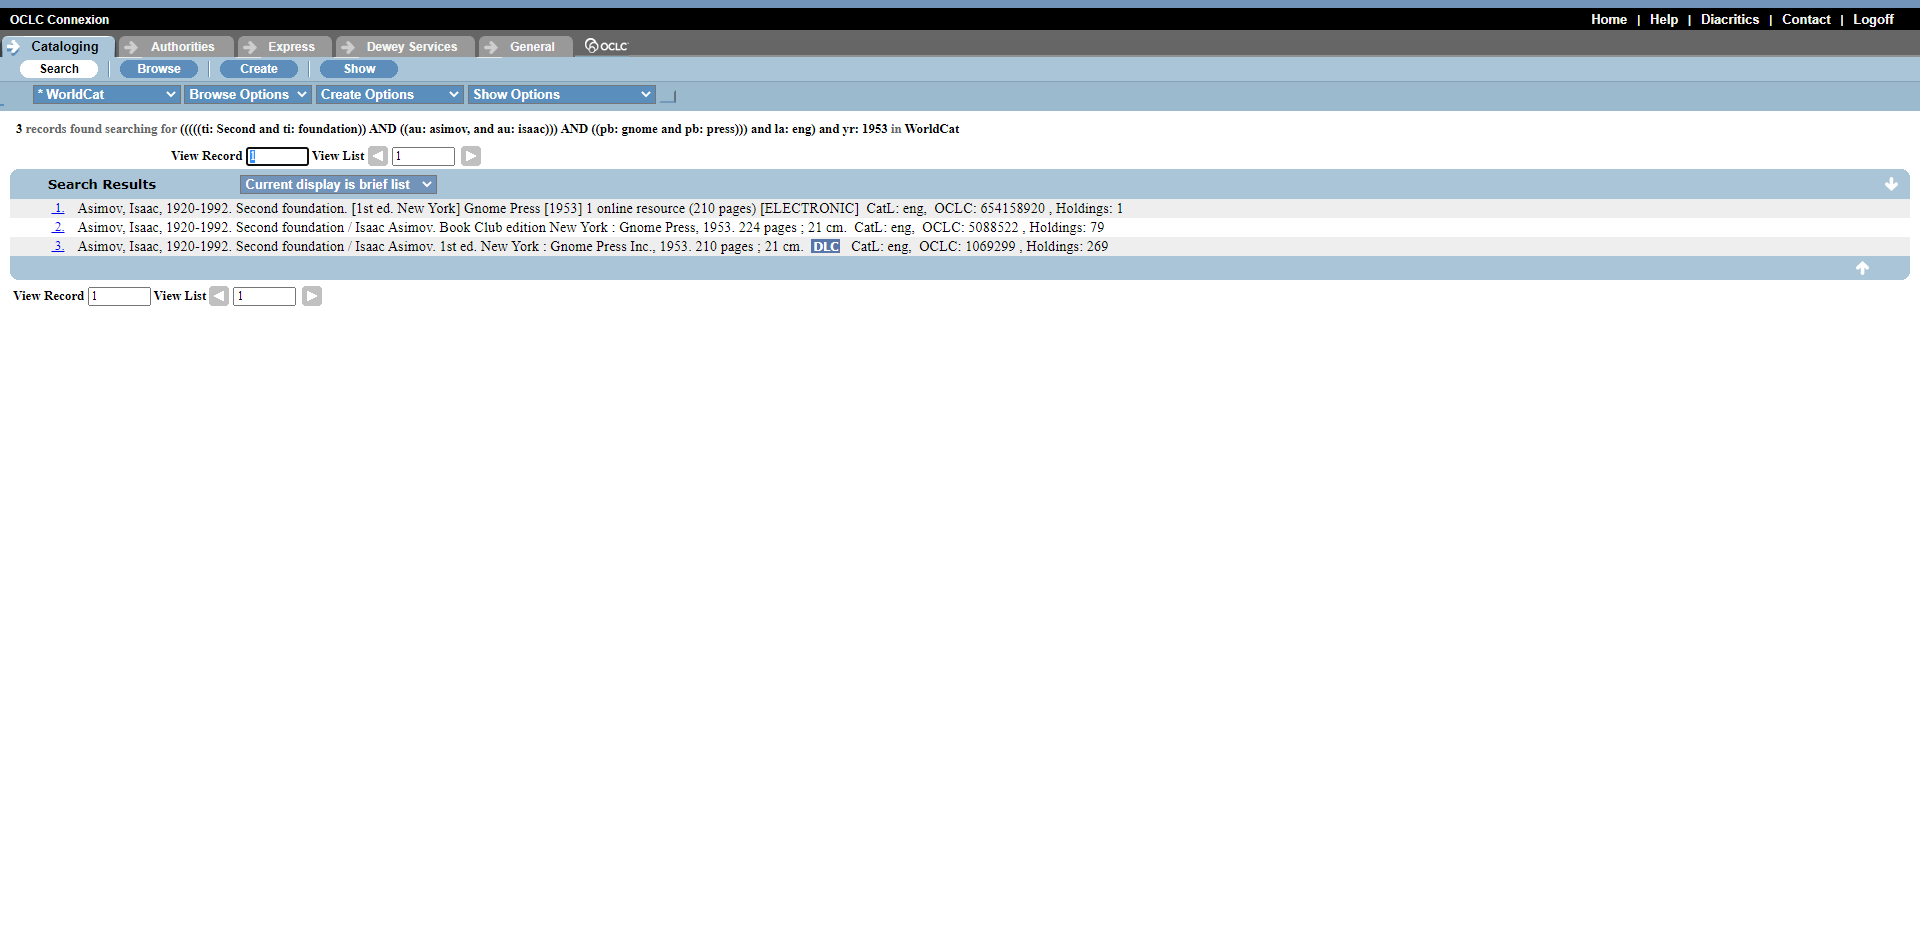 Screenshot of the OCLC website search results page.